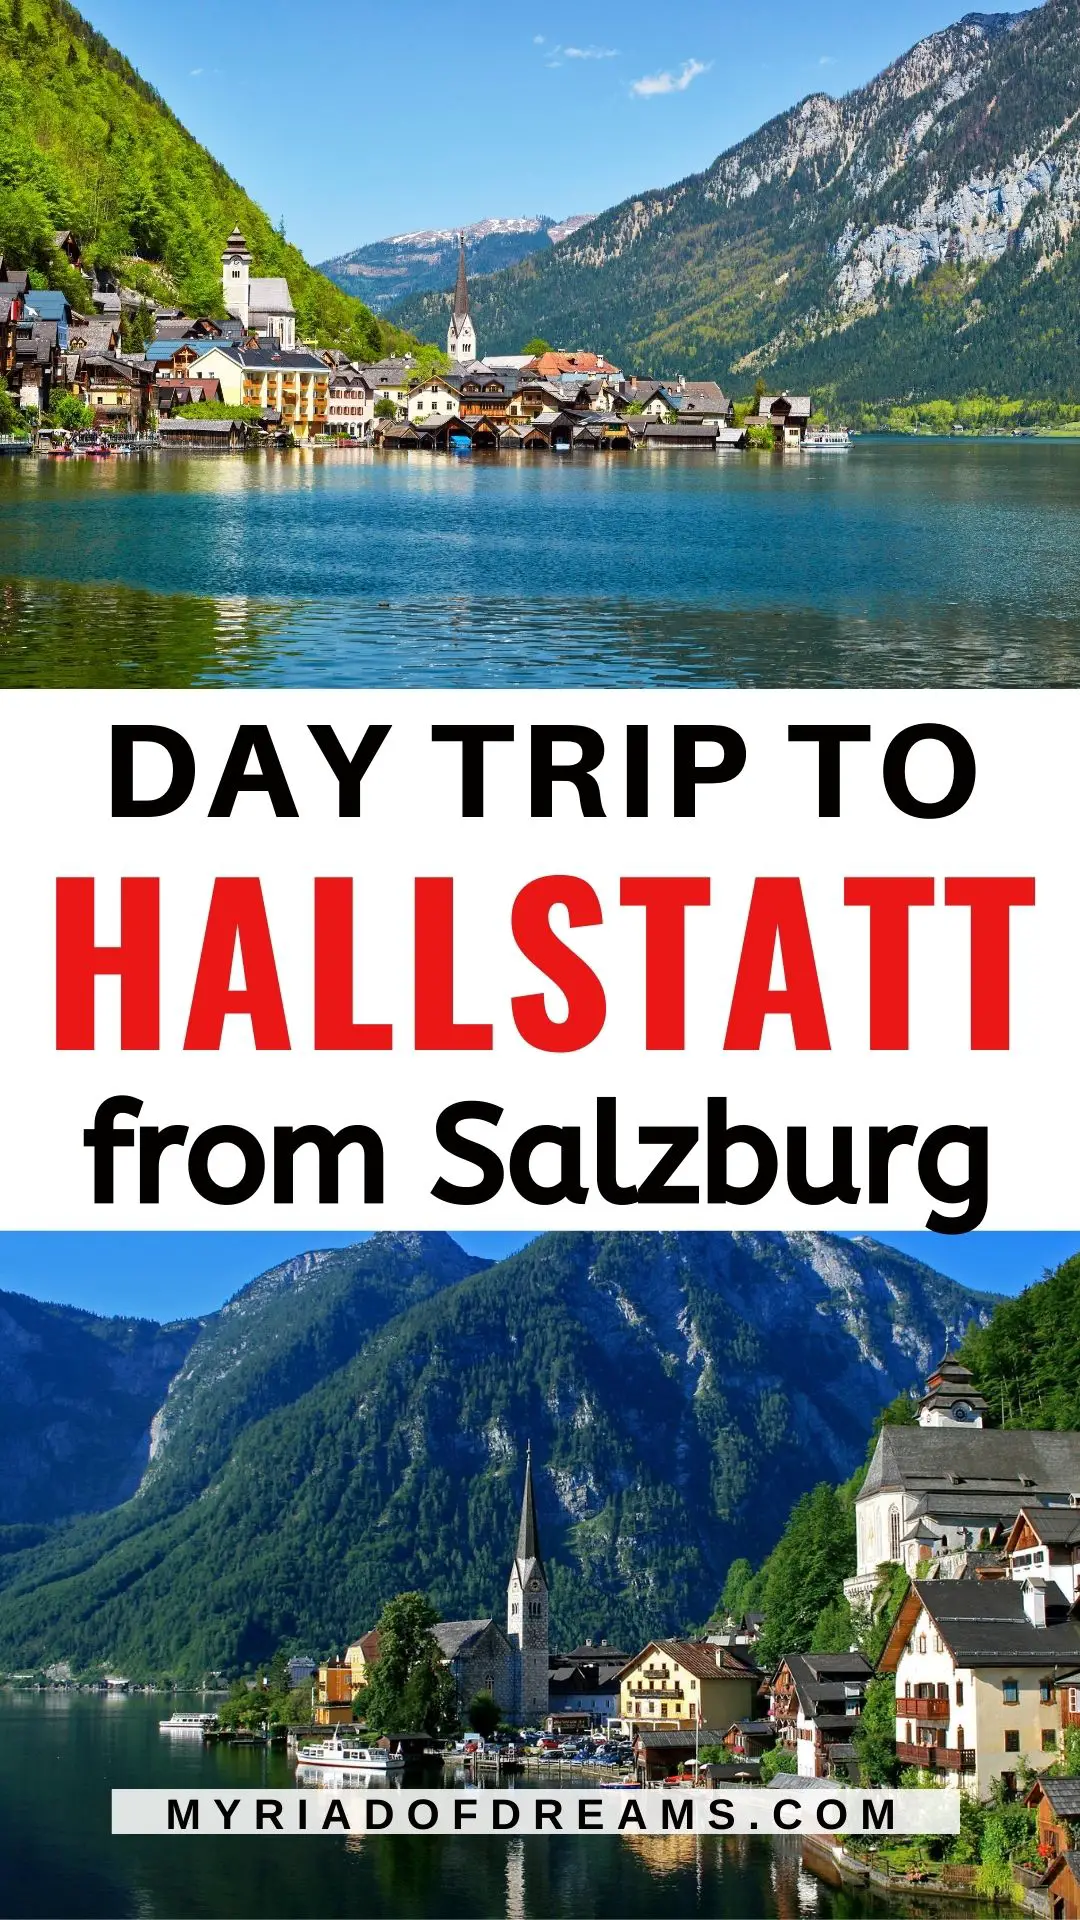 Read on to find out the ultimate Hallstatt travel guide. The only Hallstatt itinerary you need to plan a day trip from Salzburg. Find out the best things to do in Hallstatt Austria, how to reach Hallstatt from Salzburg and what to do in Hallstatt in one day. Austria travel guide, Best photo spots in Hallstatt. #austriatravel #hallstatt #europetravel 